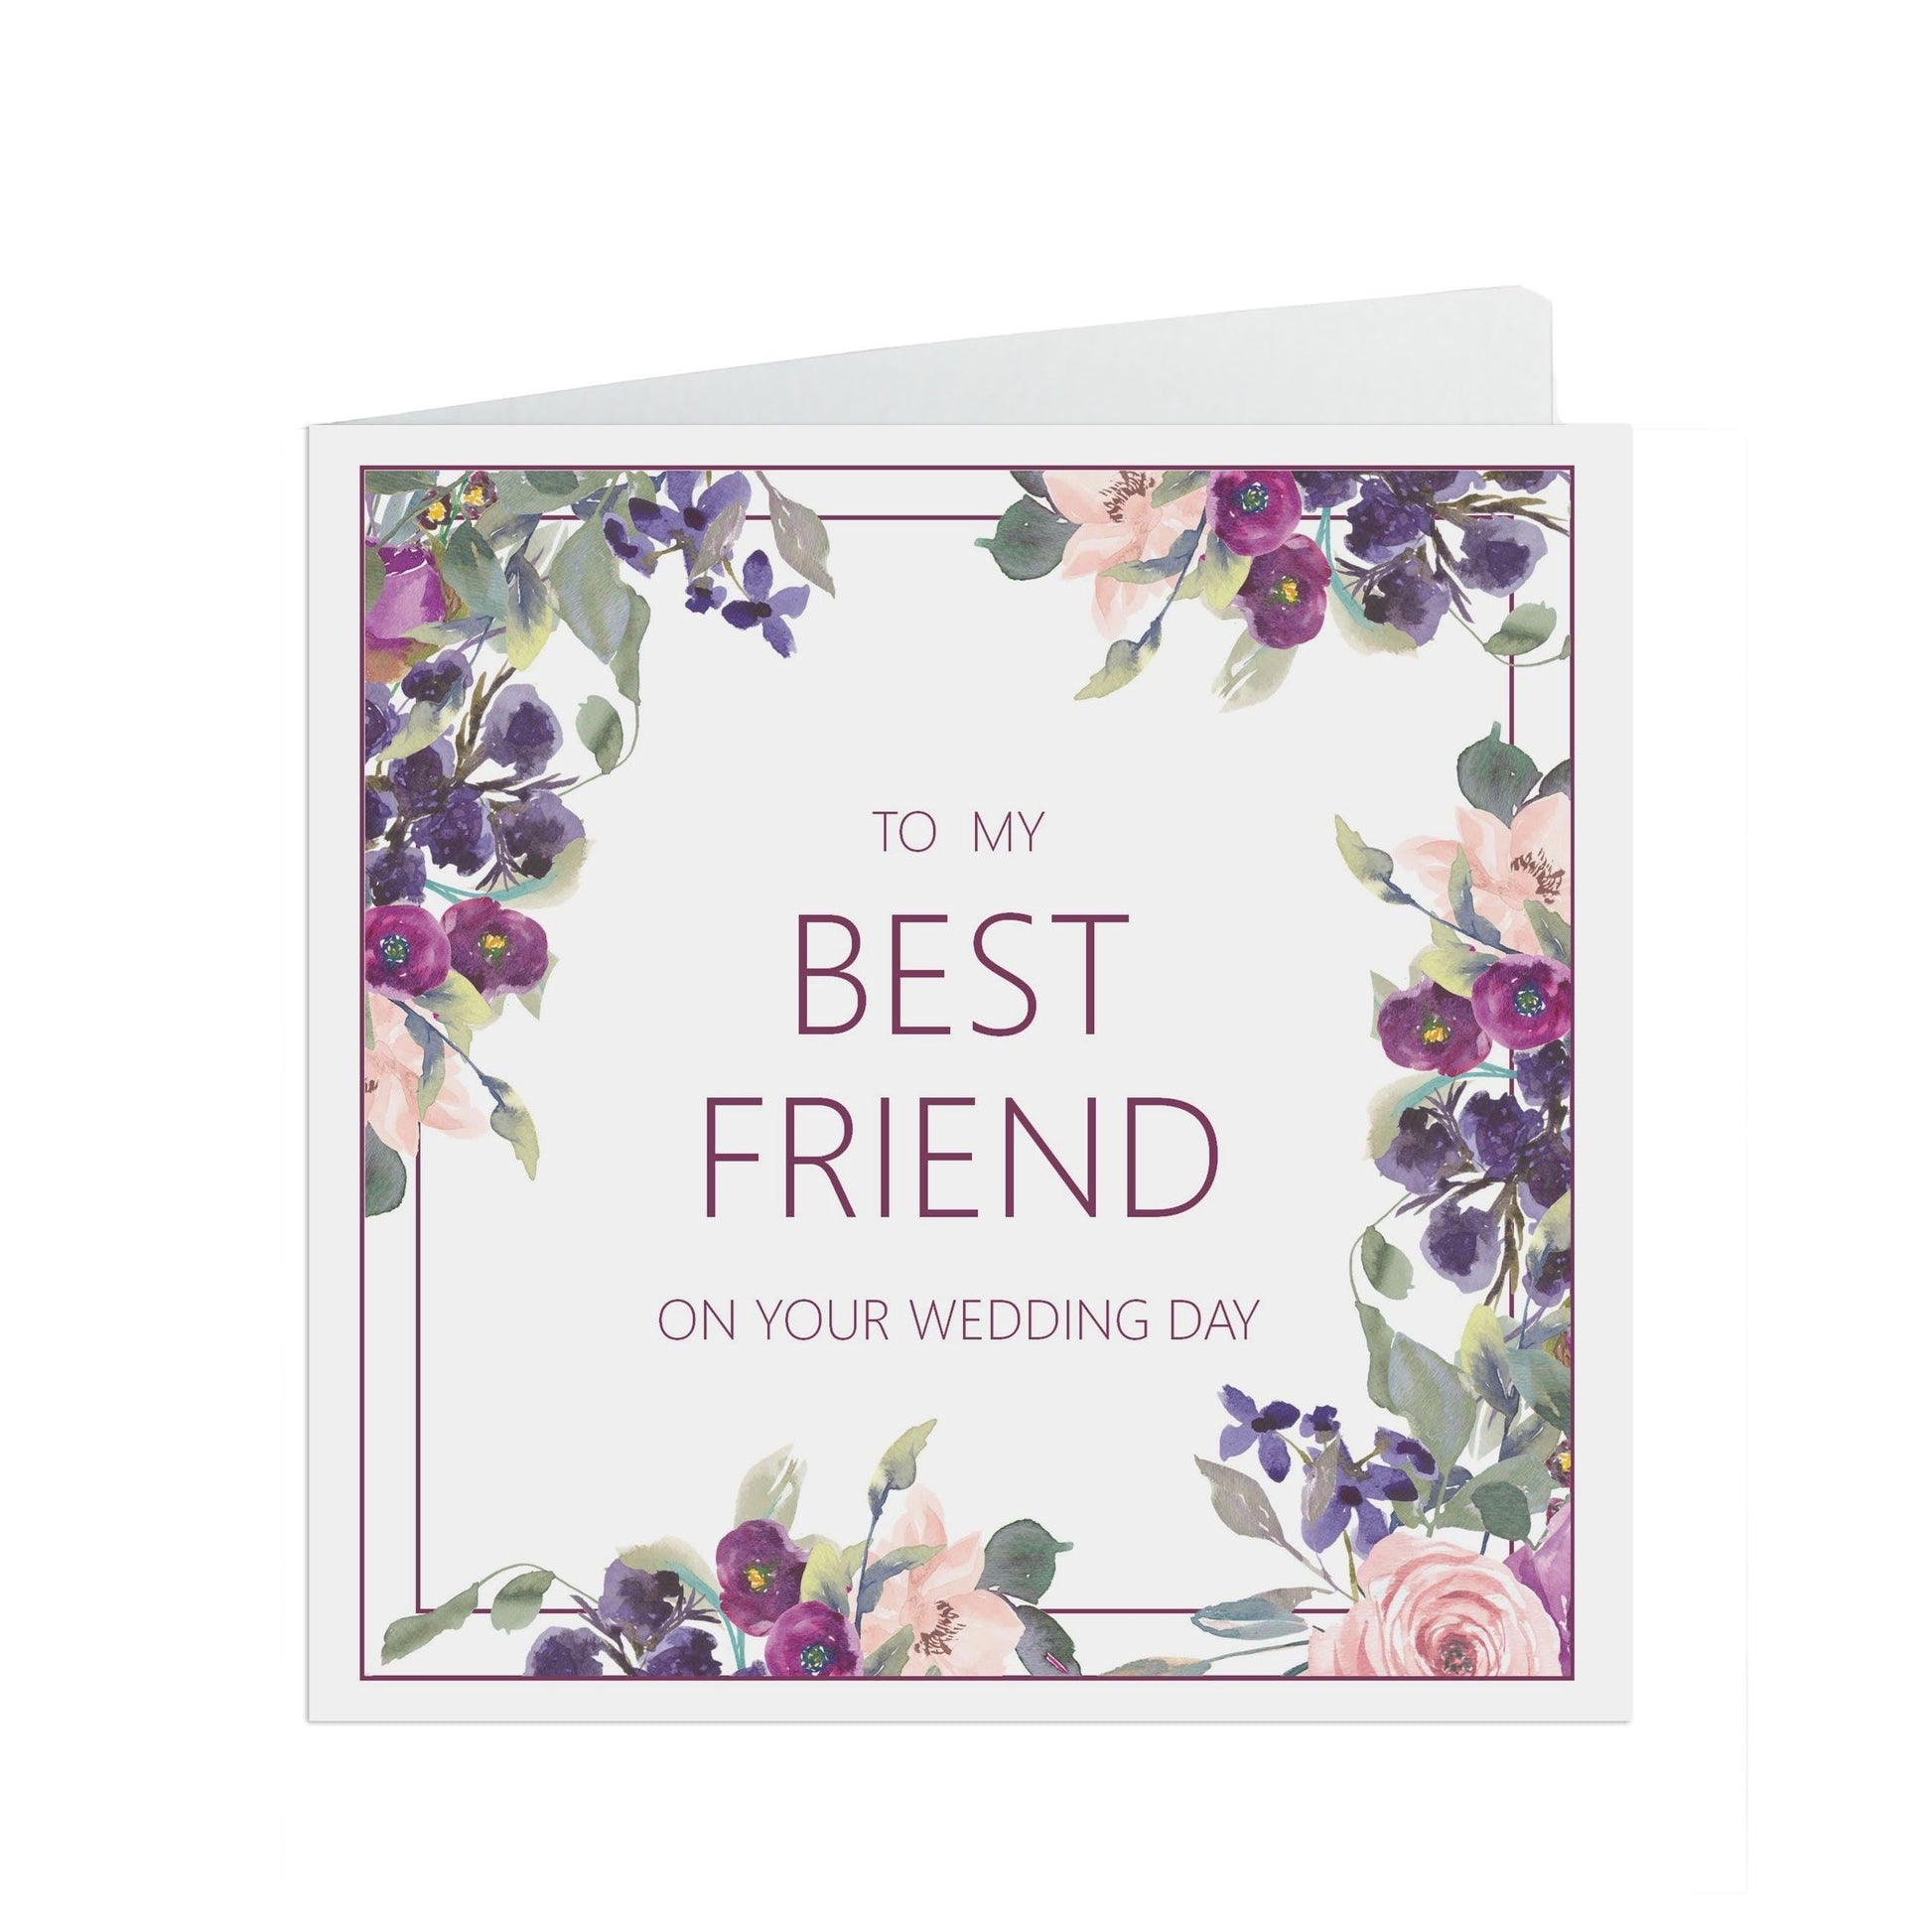  Best Friend Wedding Day Card, Purple Floral 6x6 Inches With A Kraft Envelope by PMPRINTED 